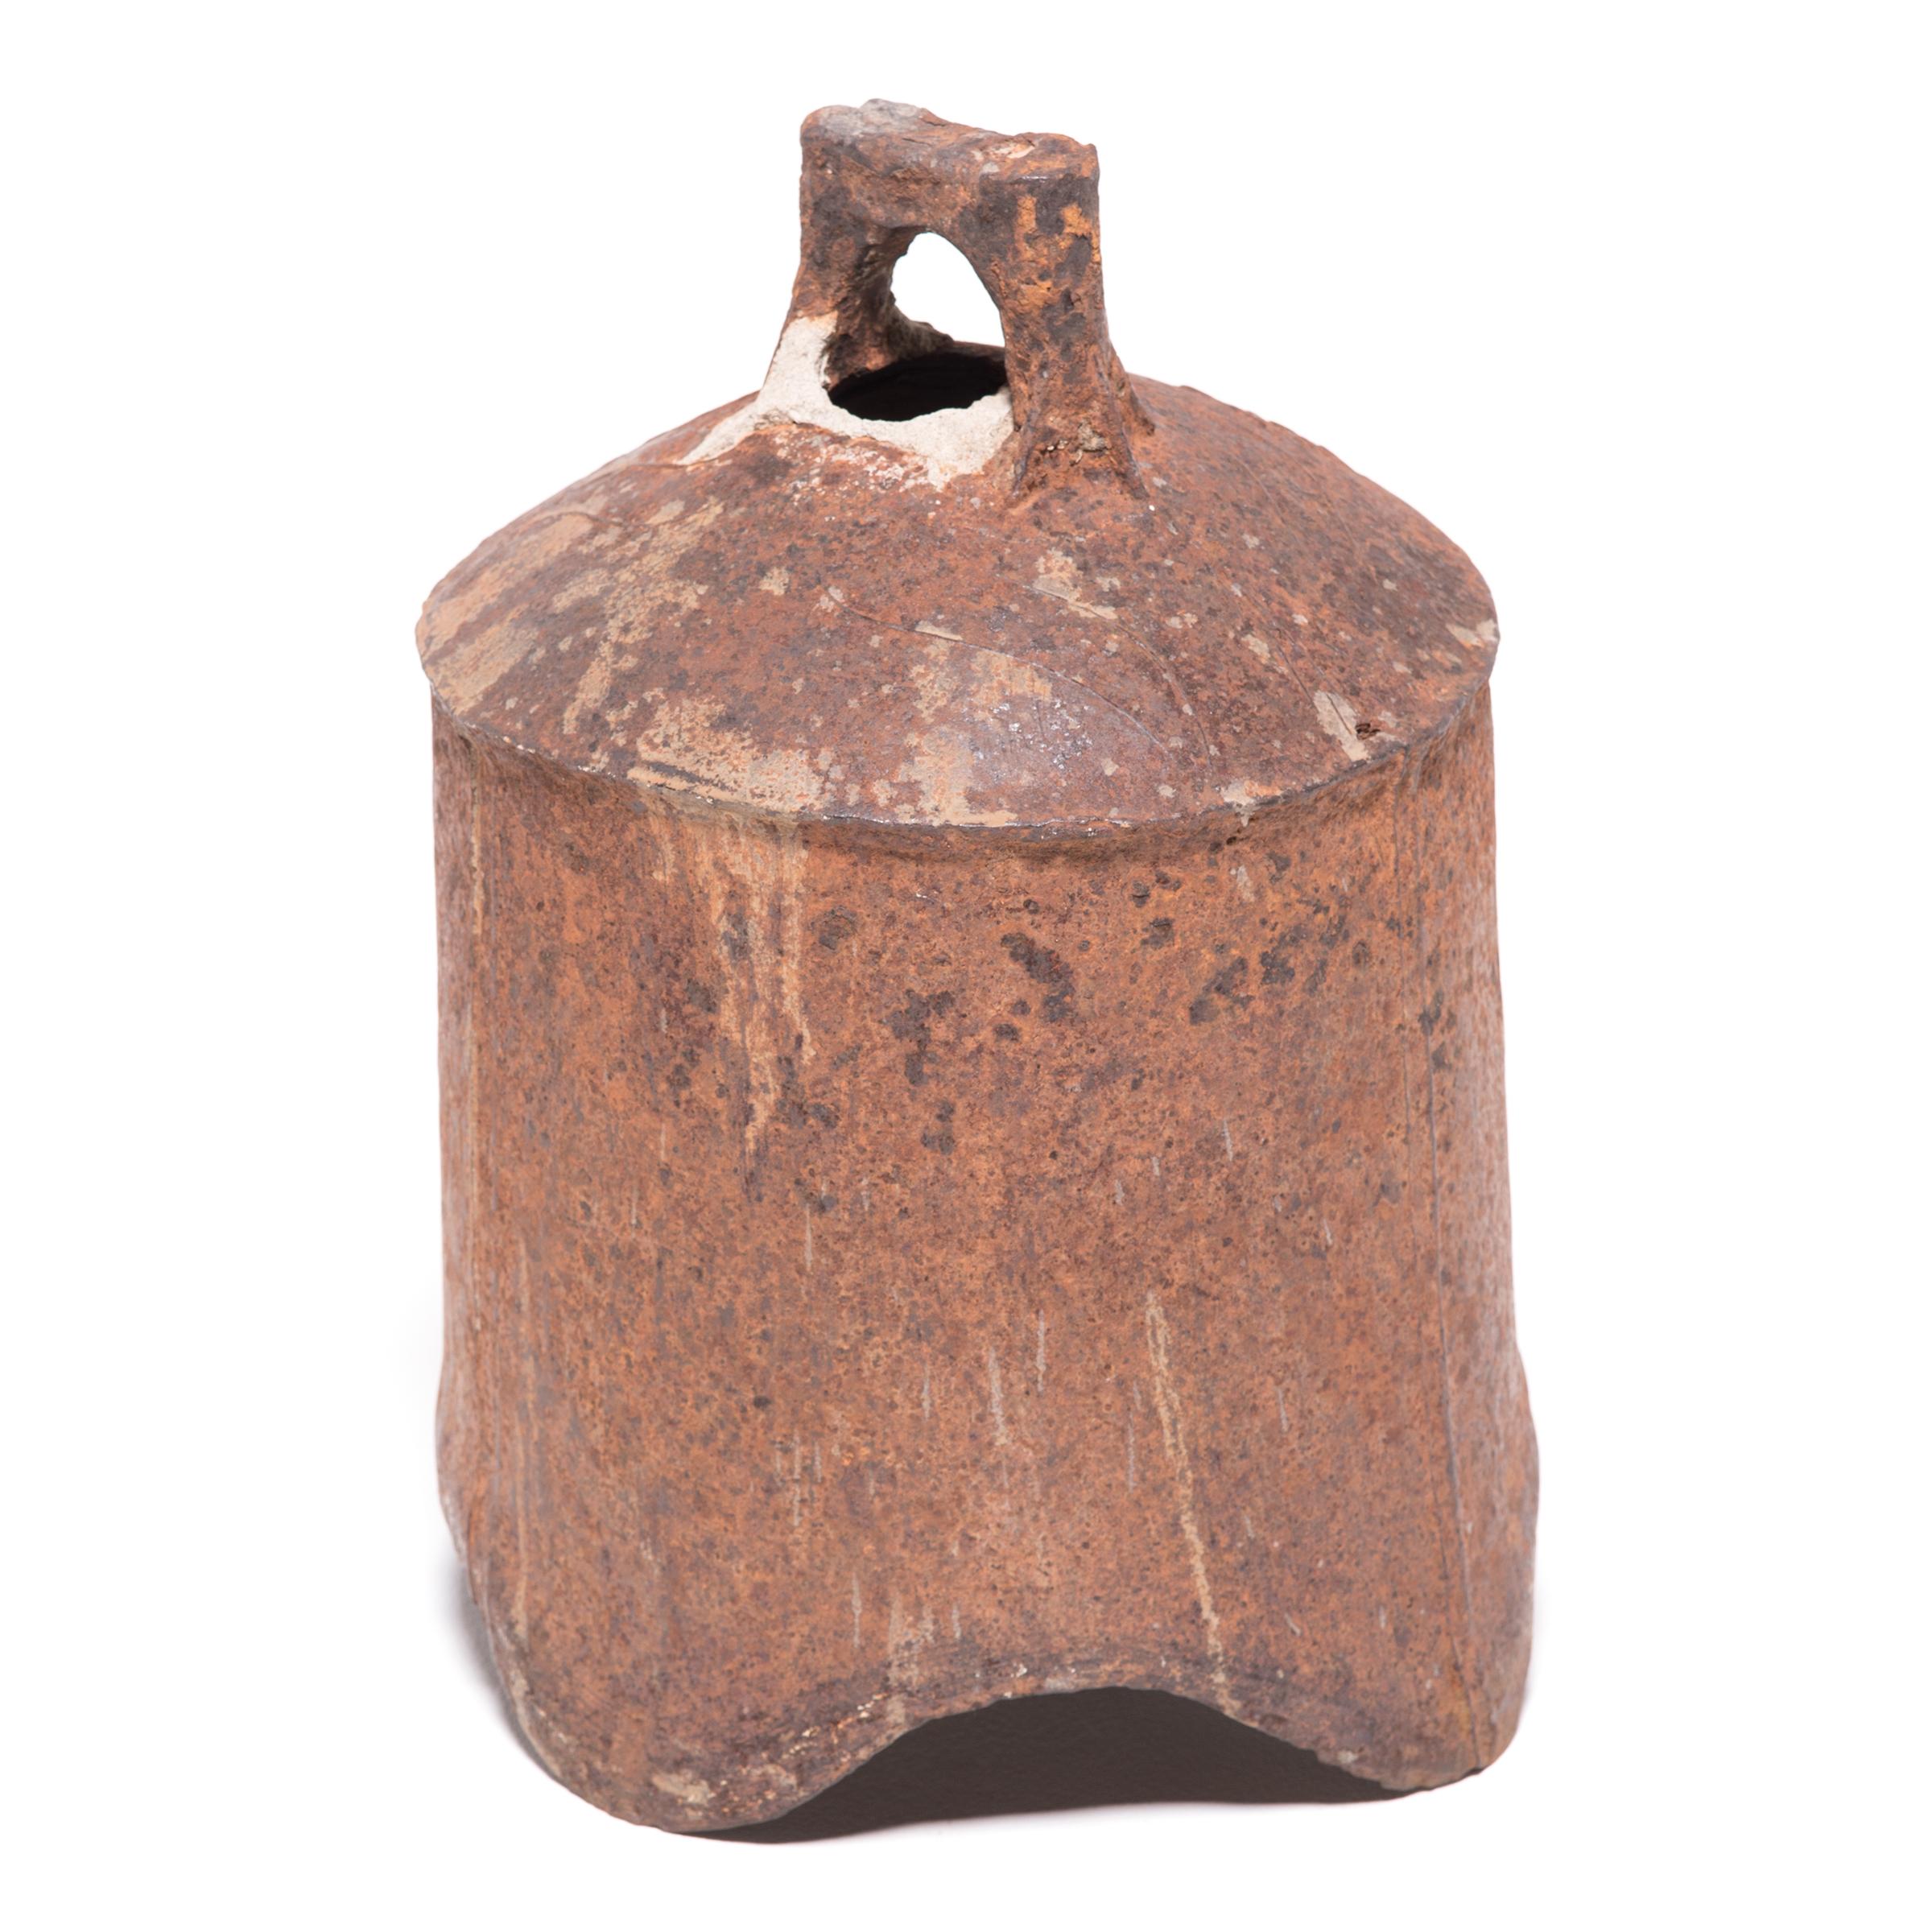 This rustic, 19th-century iron bell once pealed in celebration or gave notice of important events in a town in northern China. Marked with holes to affix the clapper or insert a pole, the bell looks lovely lit from within by a flickering candle or